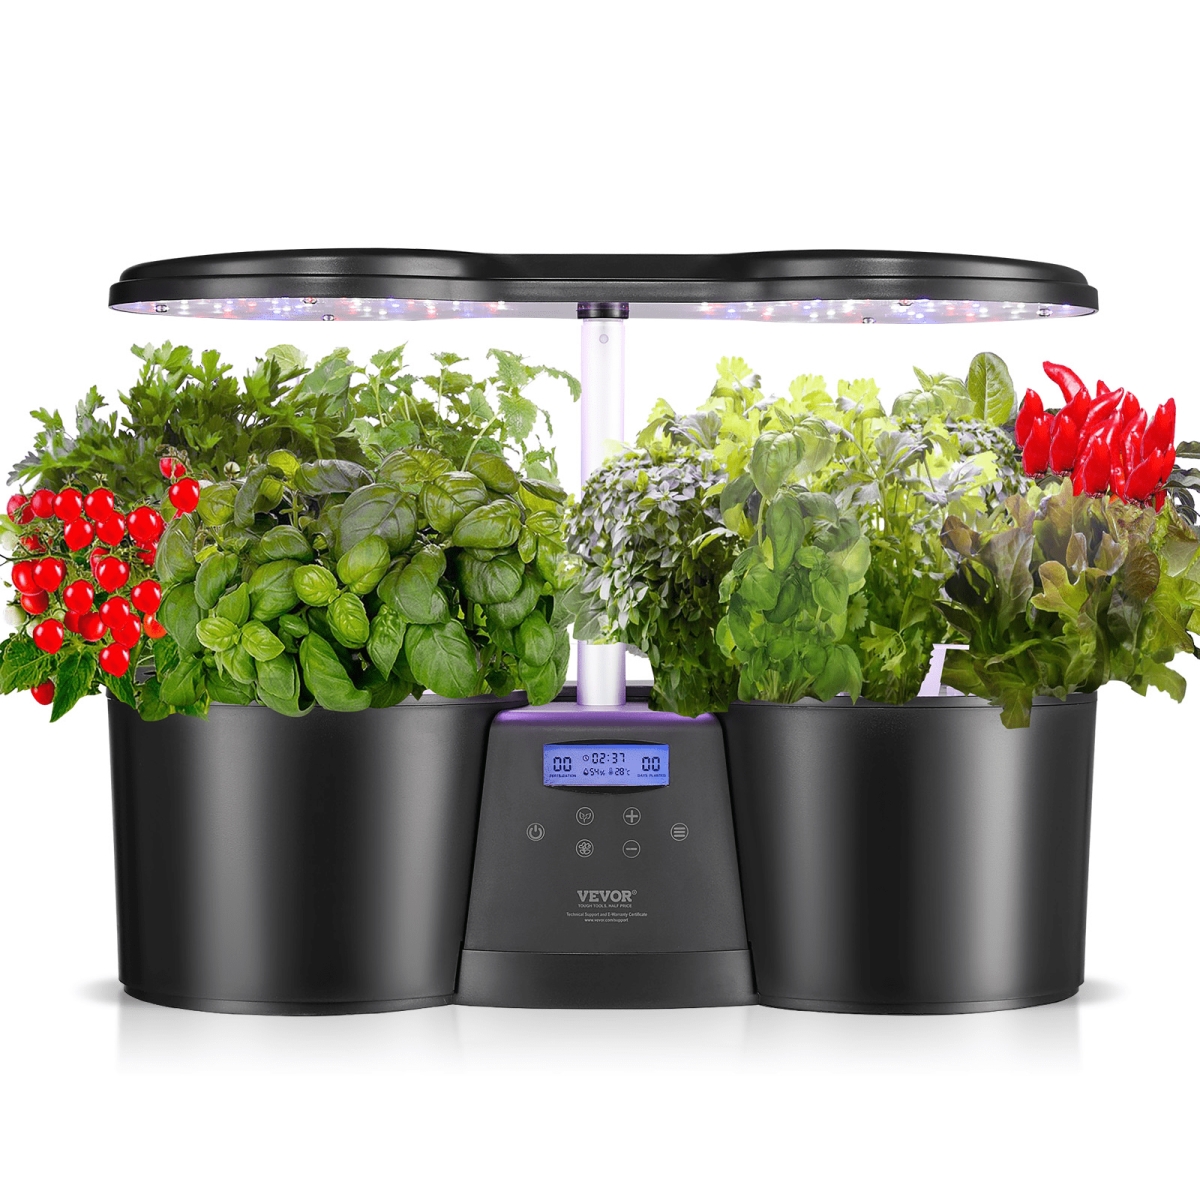 Picture of Vevor ZWSZJ1LAYER3ABPCIV1 Hydroponics Growing System 12 Pods Indoor Growing System with Full-Spectrum LED Grow Light Water Tank Auto Timer